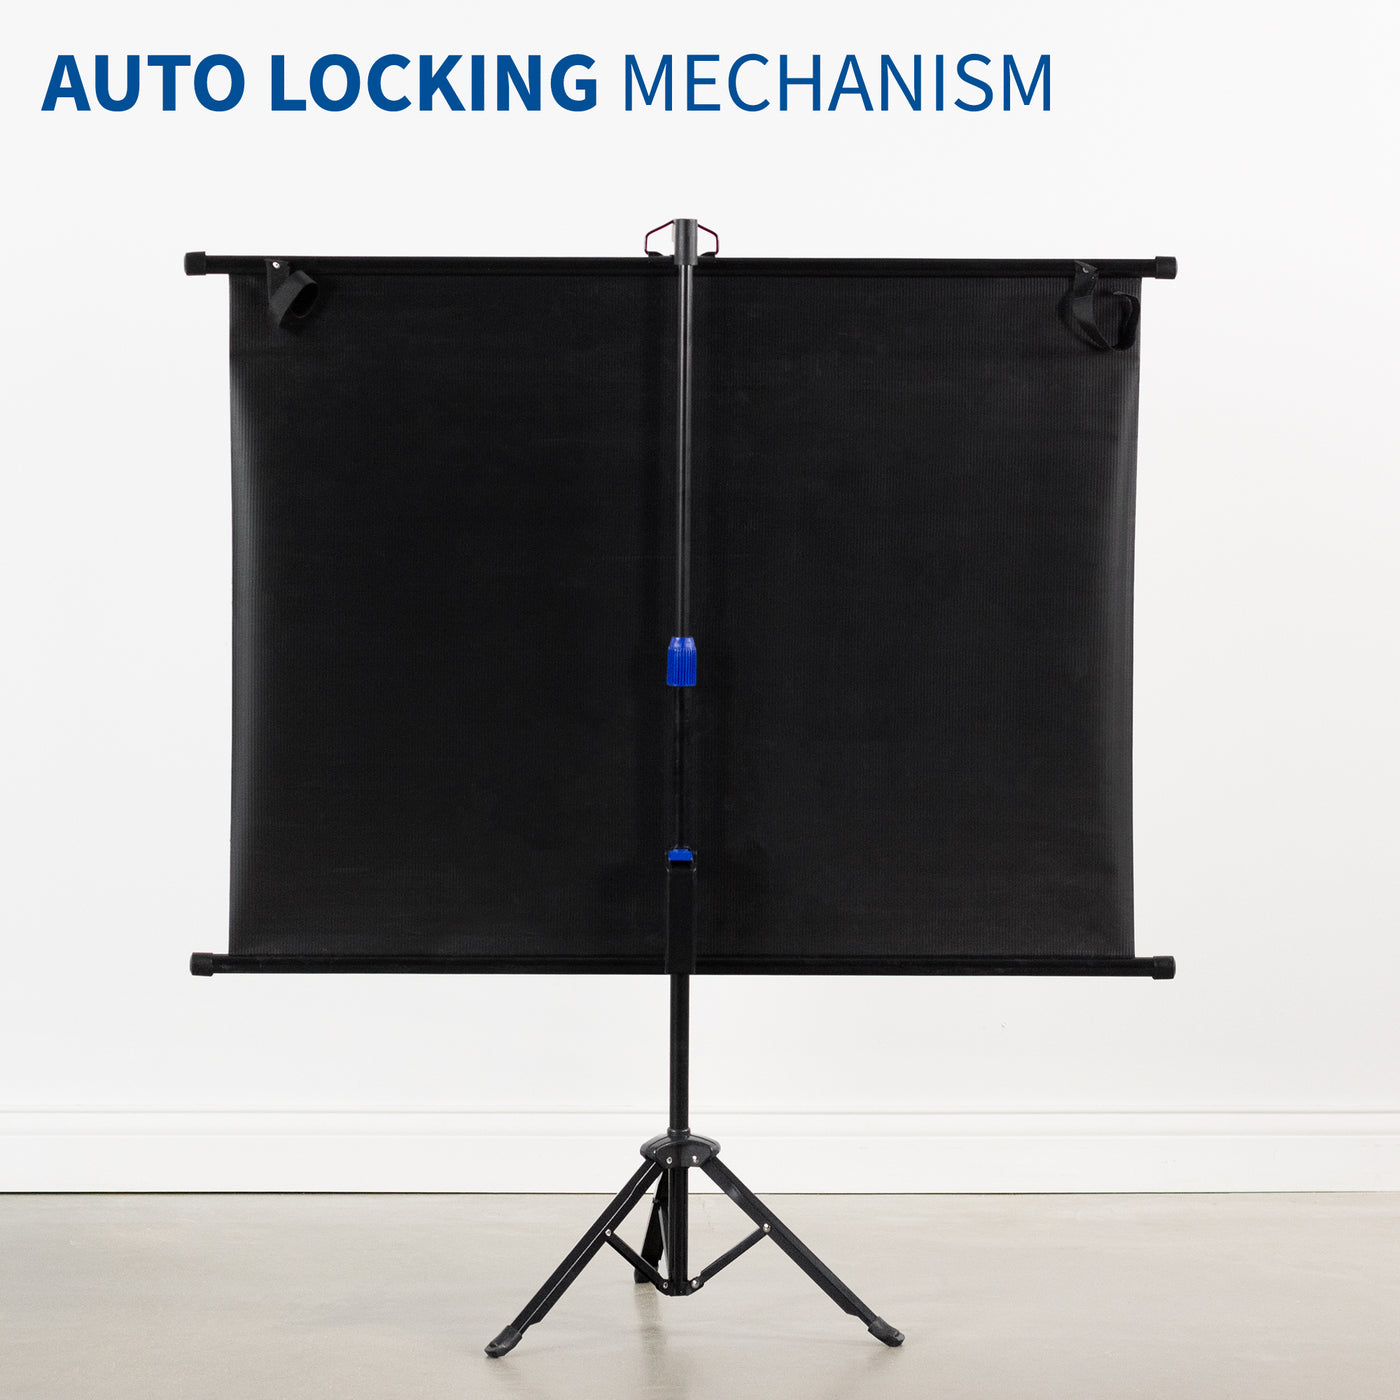 Built in mechanic of a tripod projector screen with a locking mechanism for a secure setup.